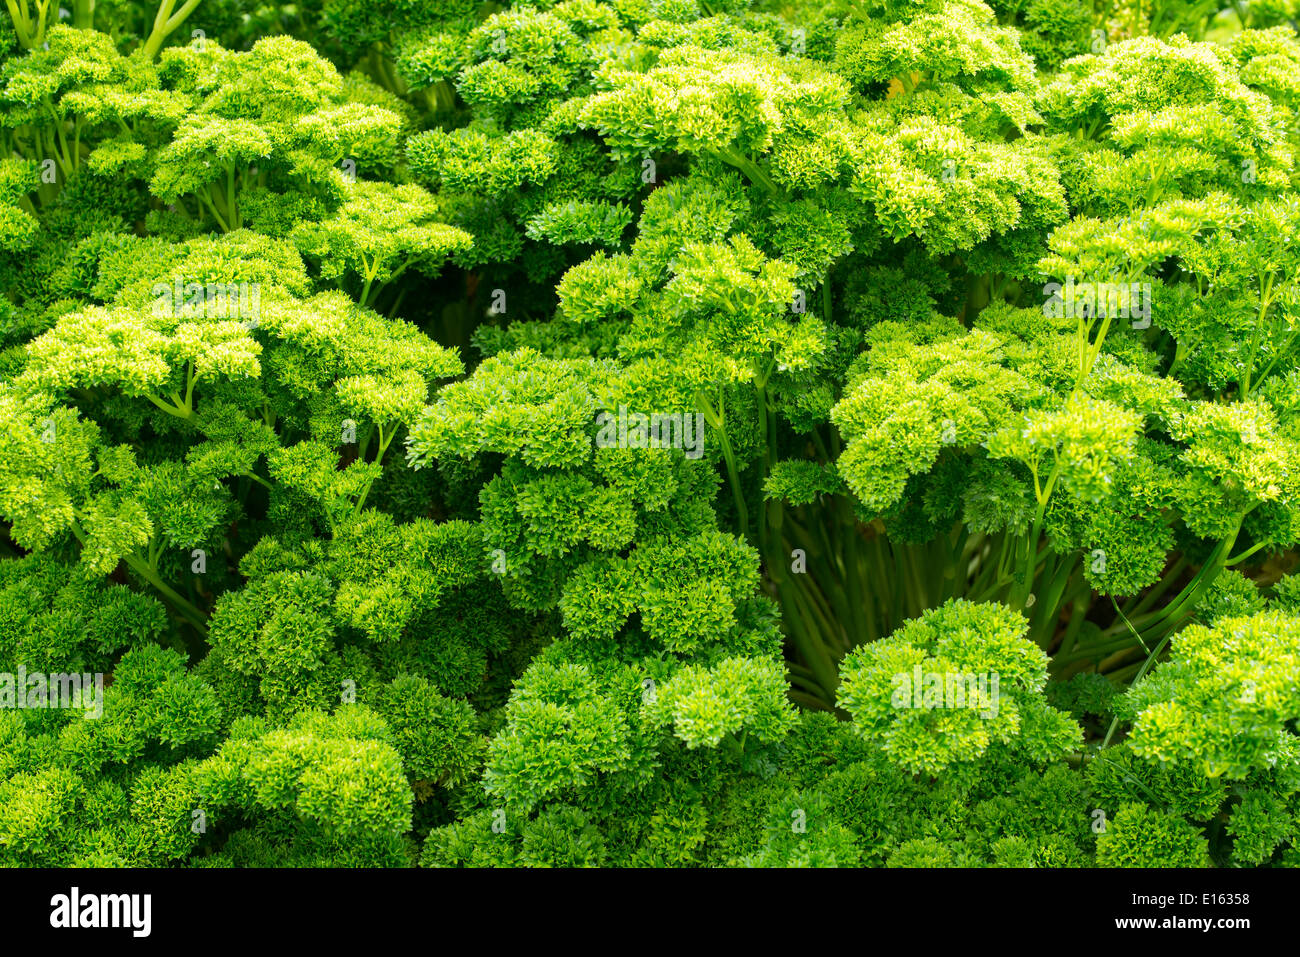 Curly parsley ready for the kitchen Stock Photo